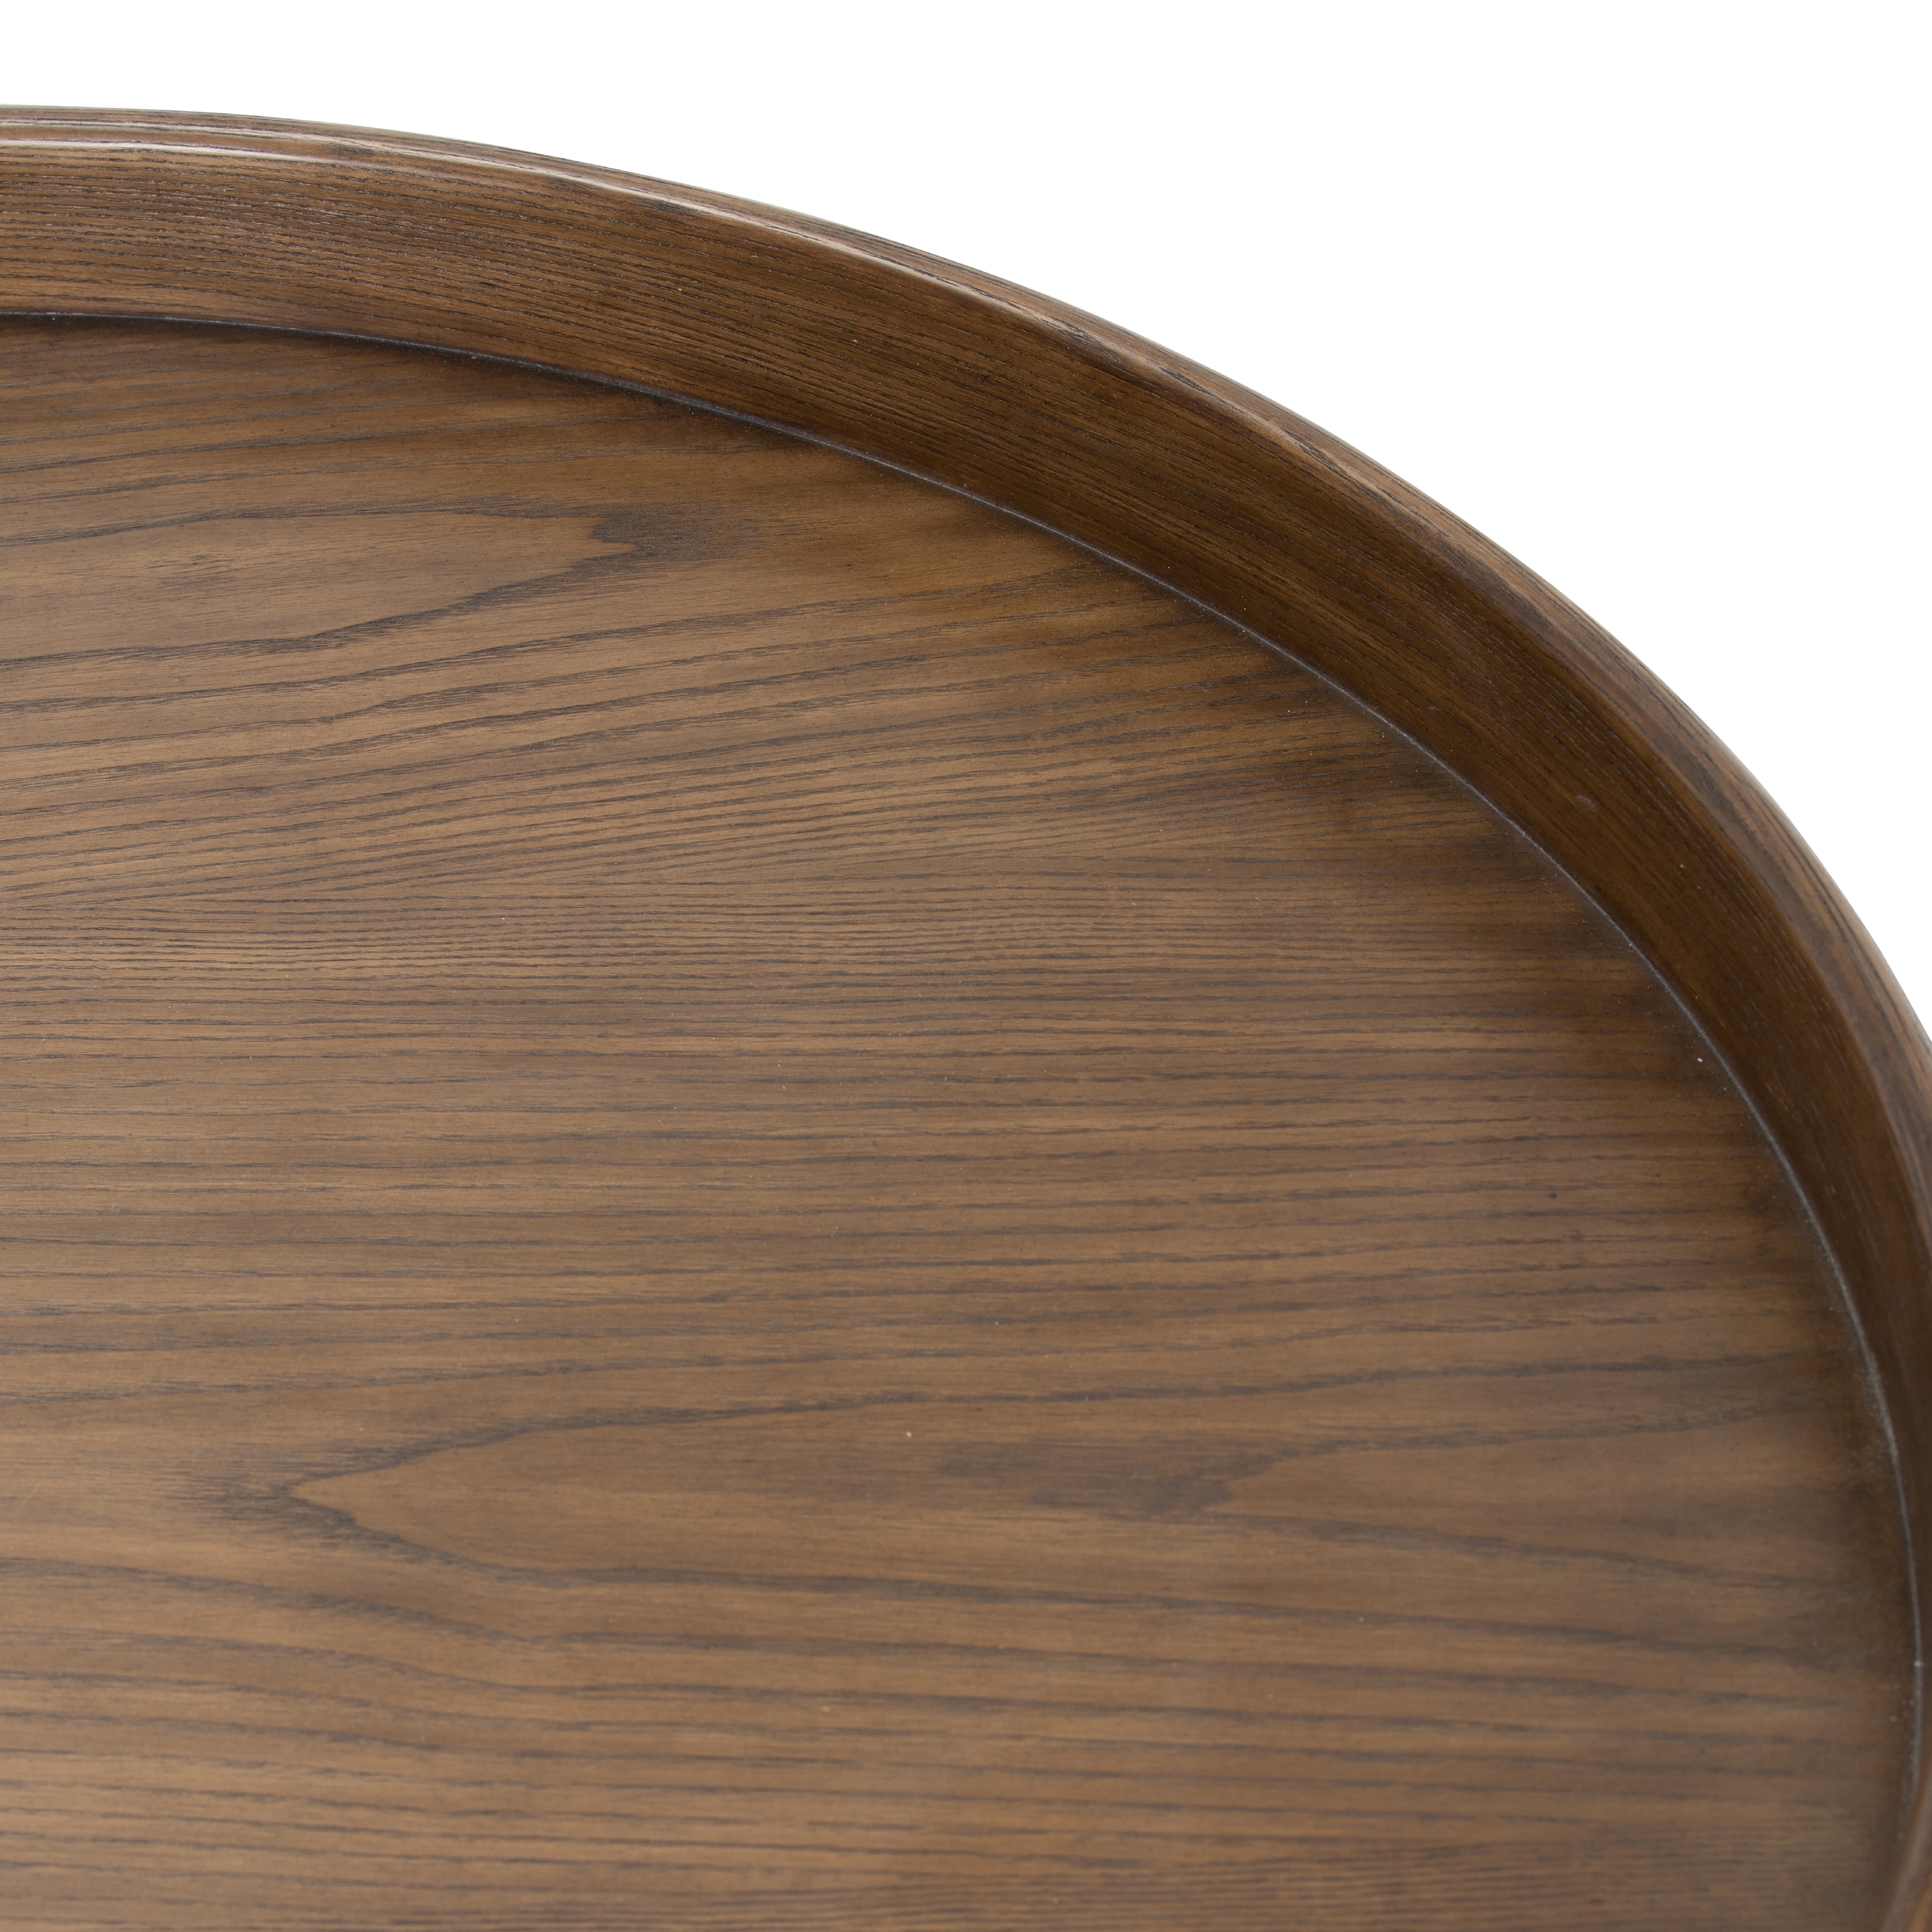 Lee Coffee Table-Natural Ash - Image 5